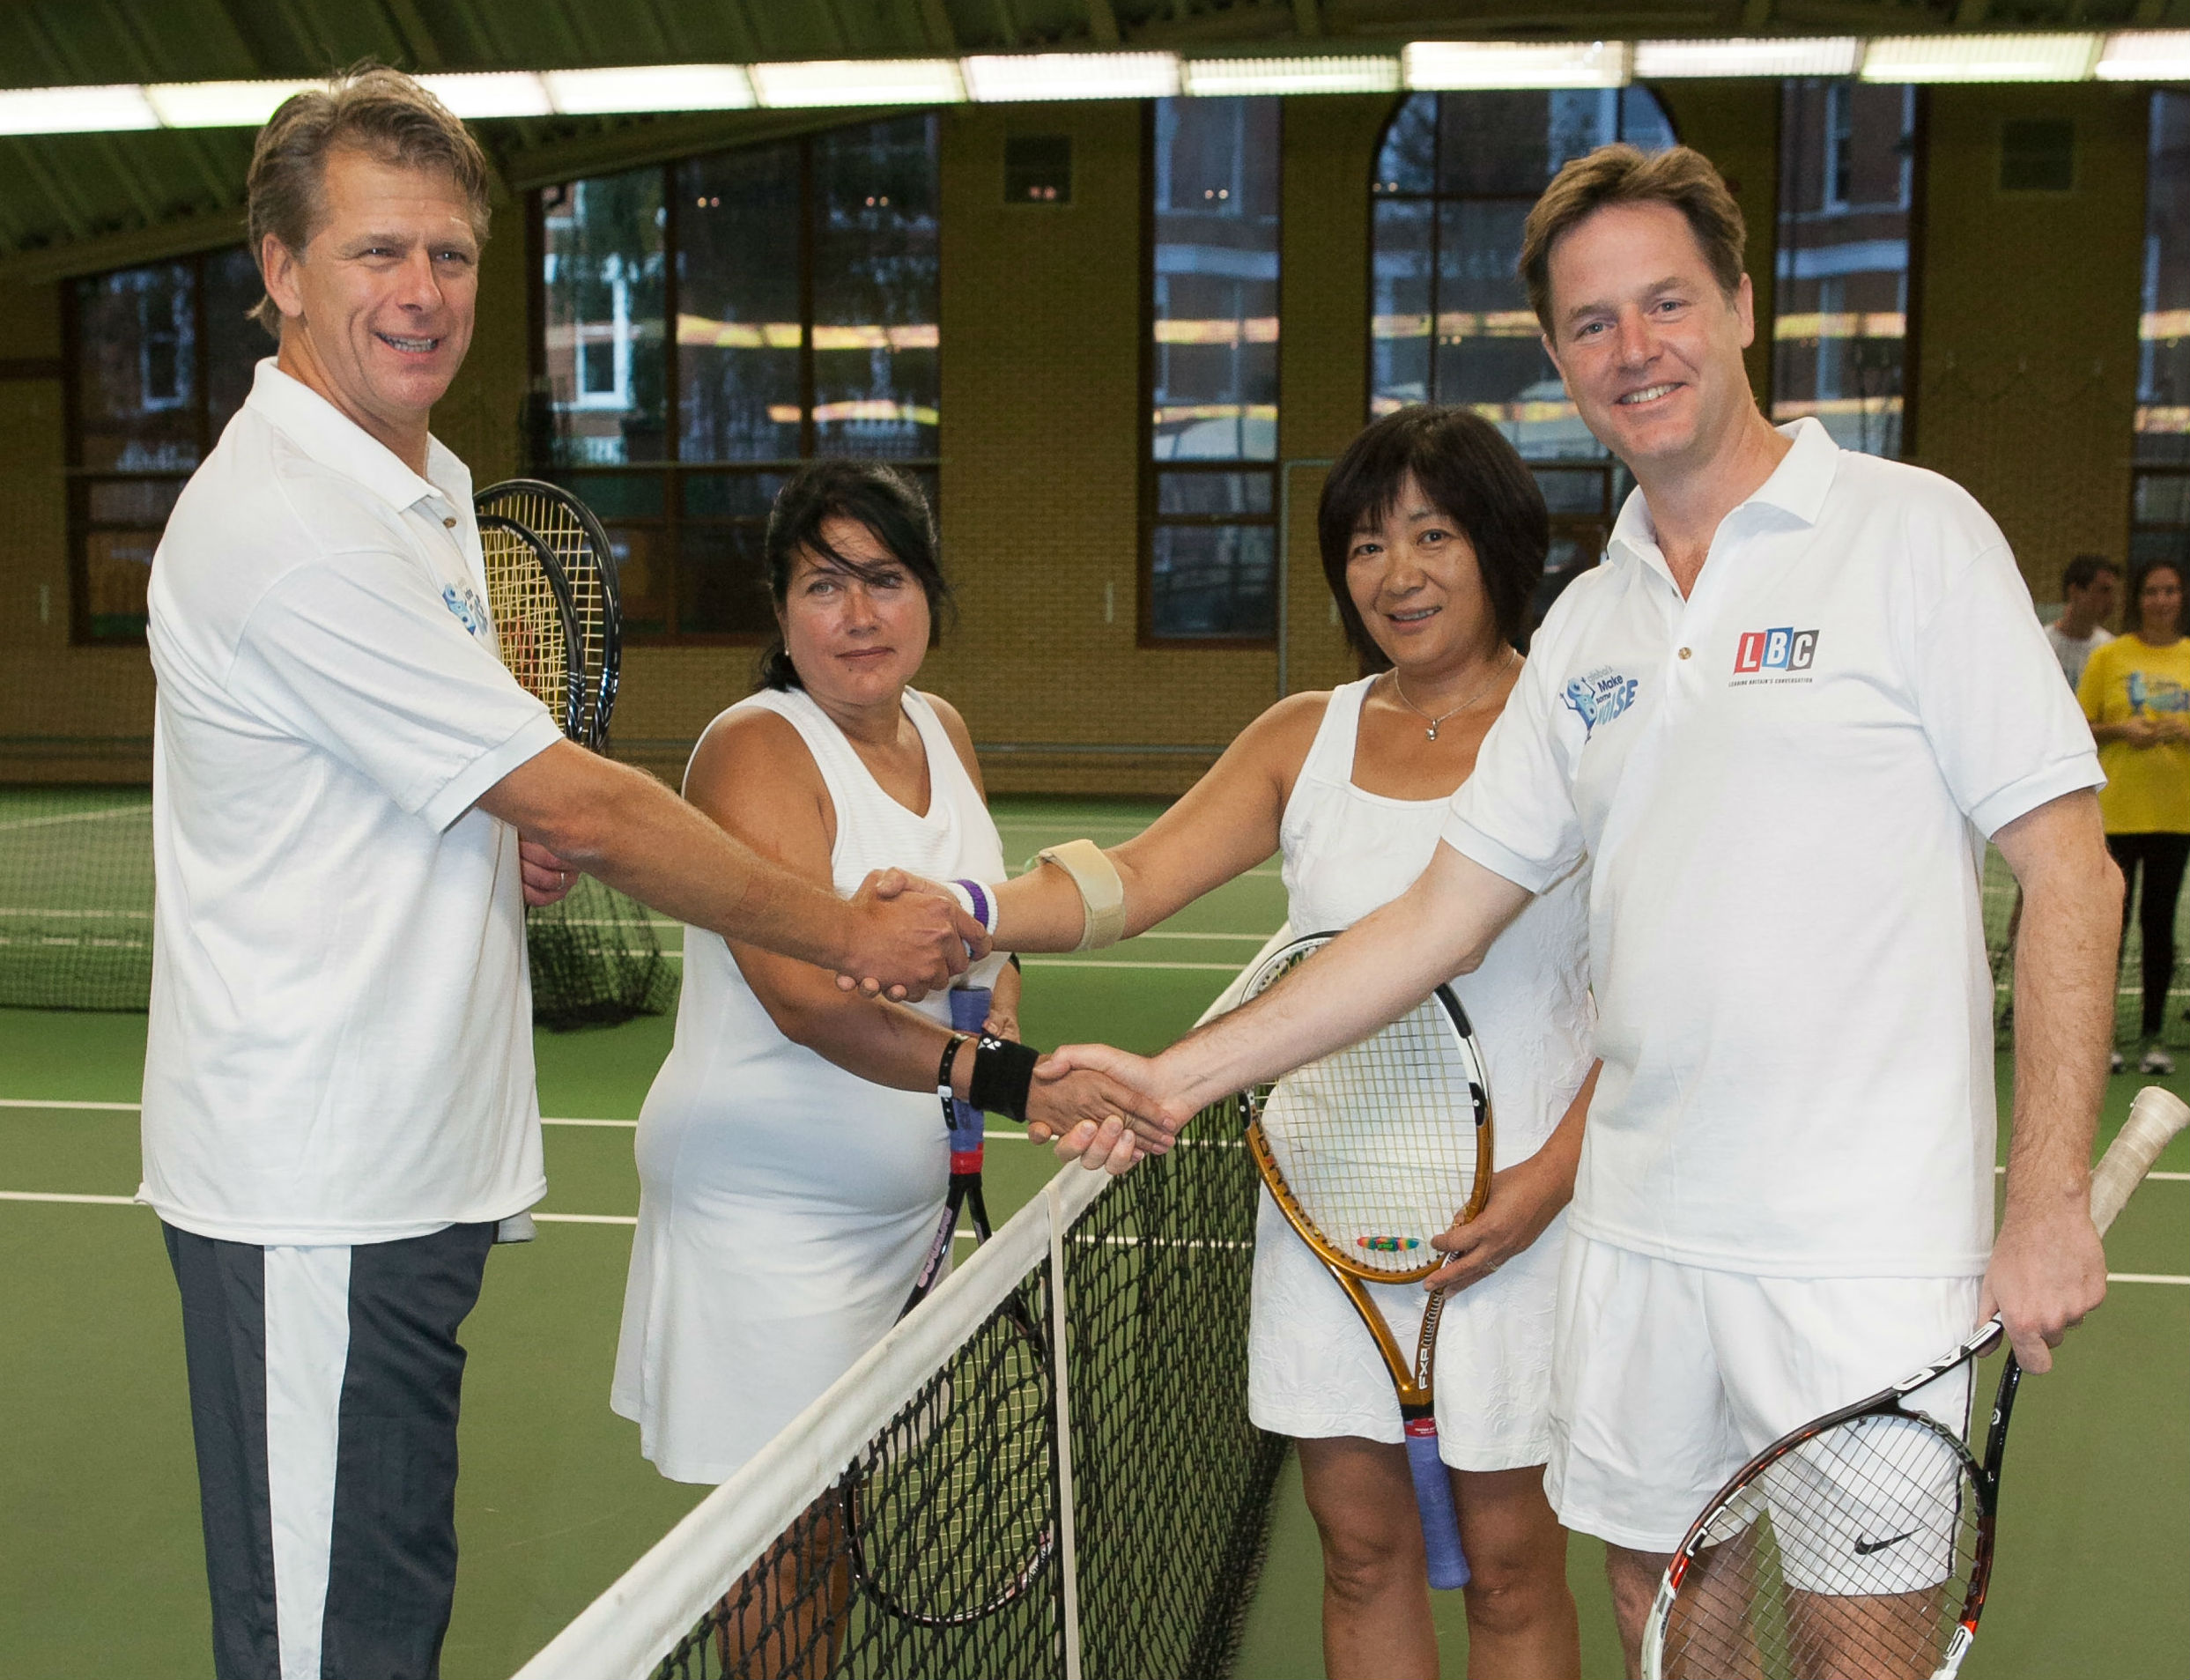 Nick Clegg Defeated By Andrew Castle In Make Some Noise Tennis Match!